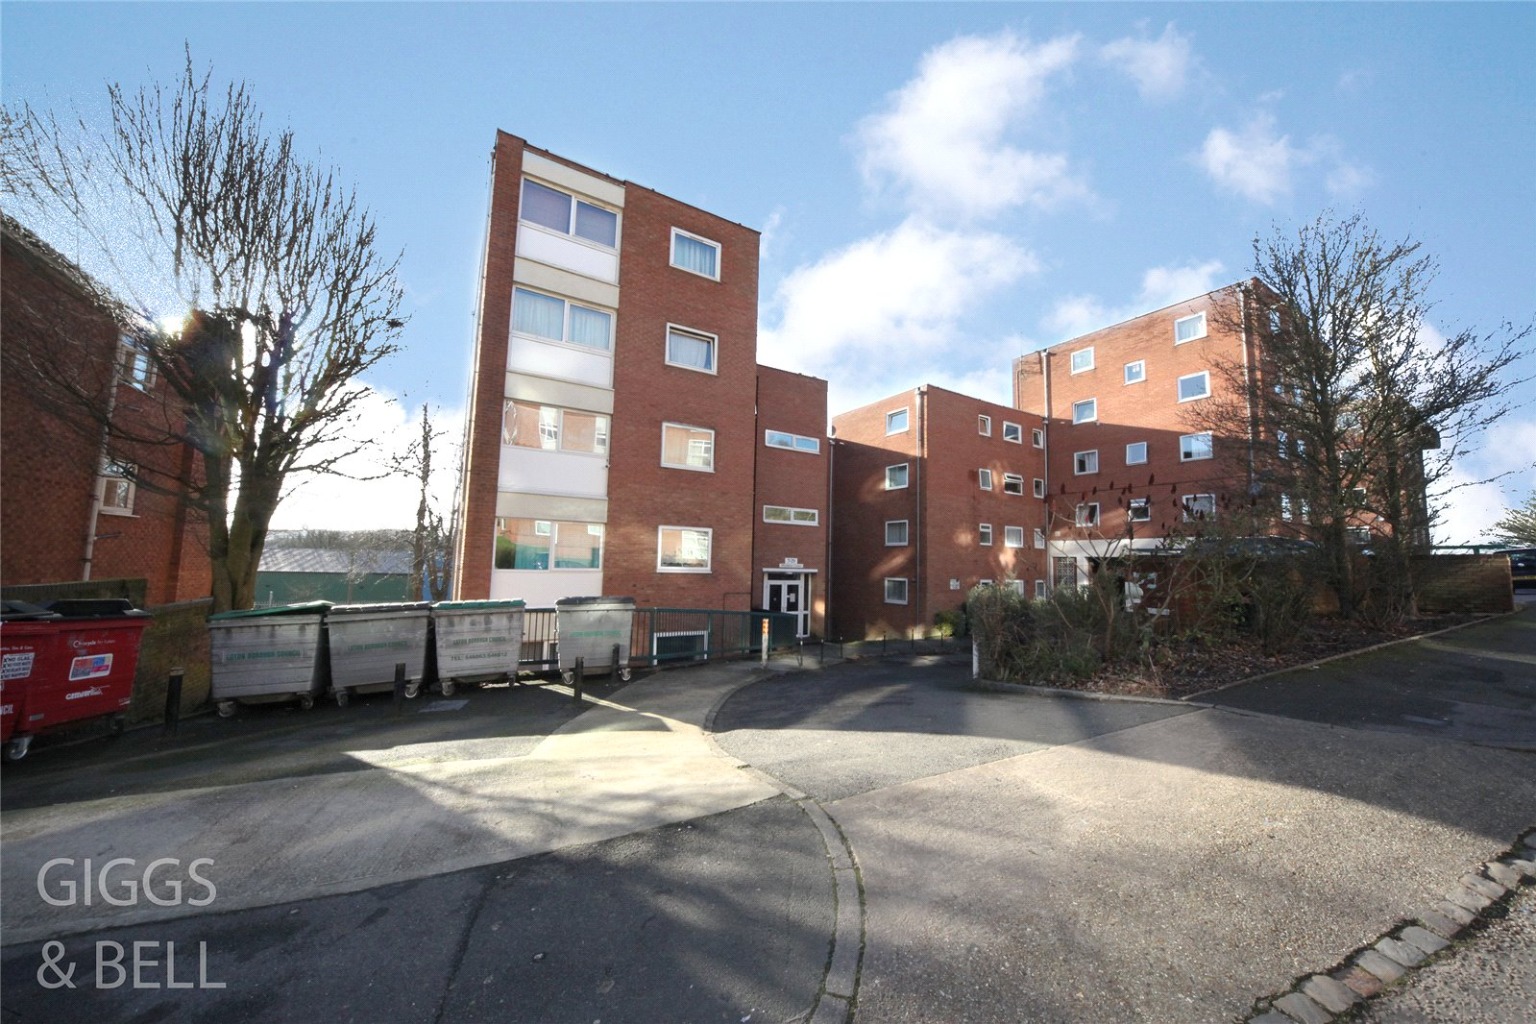 Moulton Court is an ideal two-bedroom lower ground property situated in a perfect location looking for those to commute or take advantage of other essential amenities which include shops, schools, and supermarkets. The property benefits from double glazed windows, electric heating.